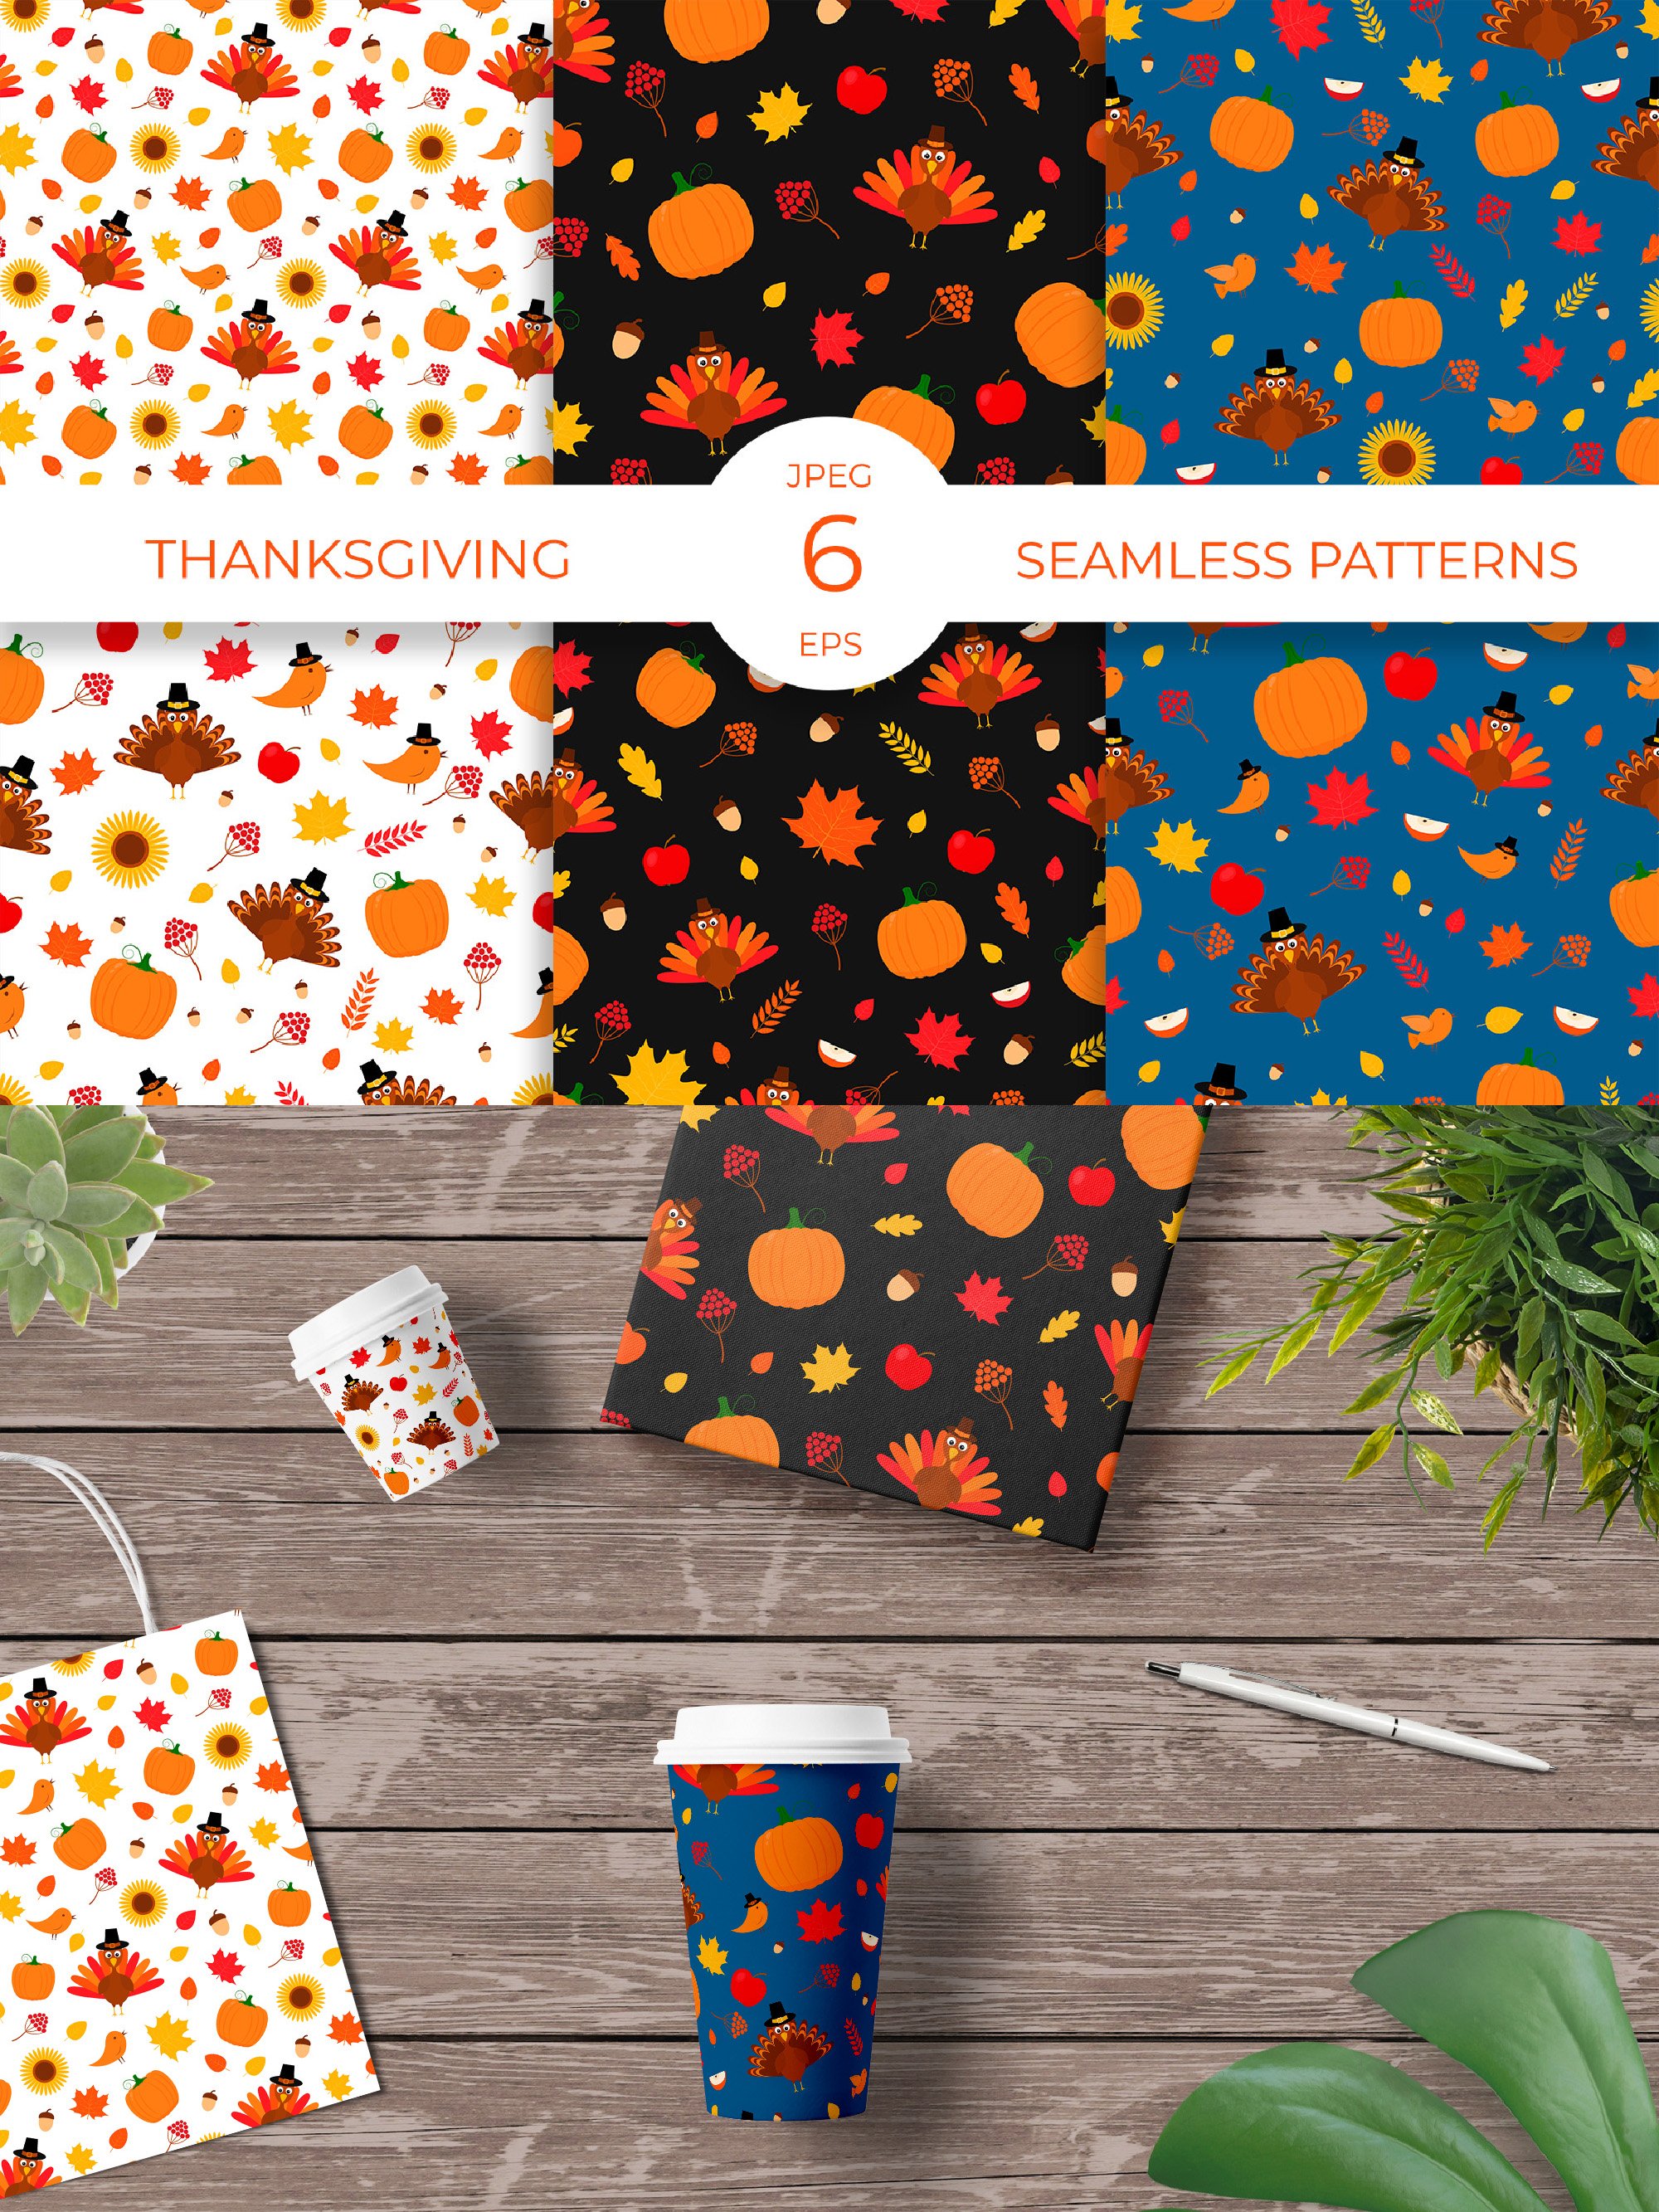 Thanksgiving patterns for different textures.